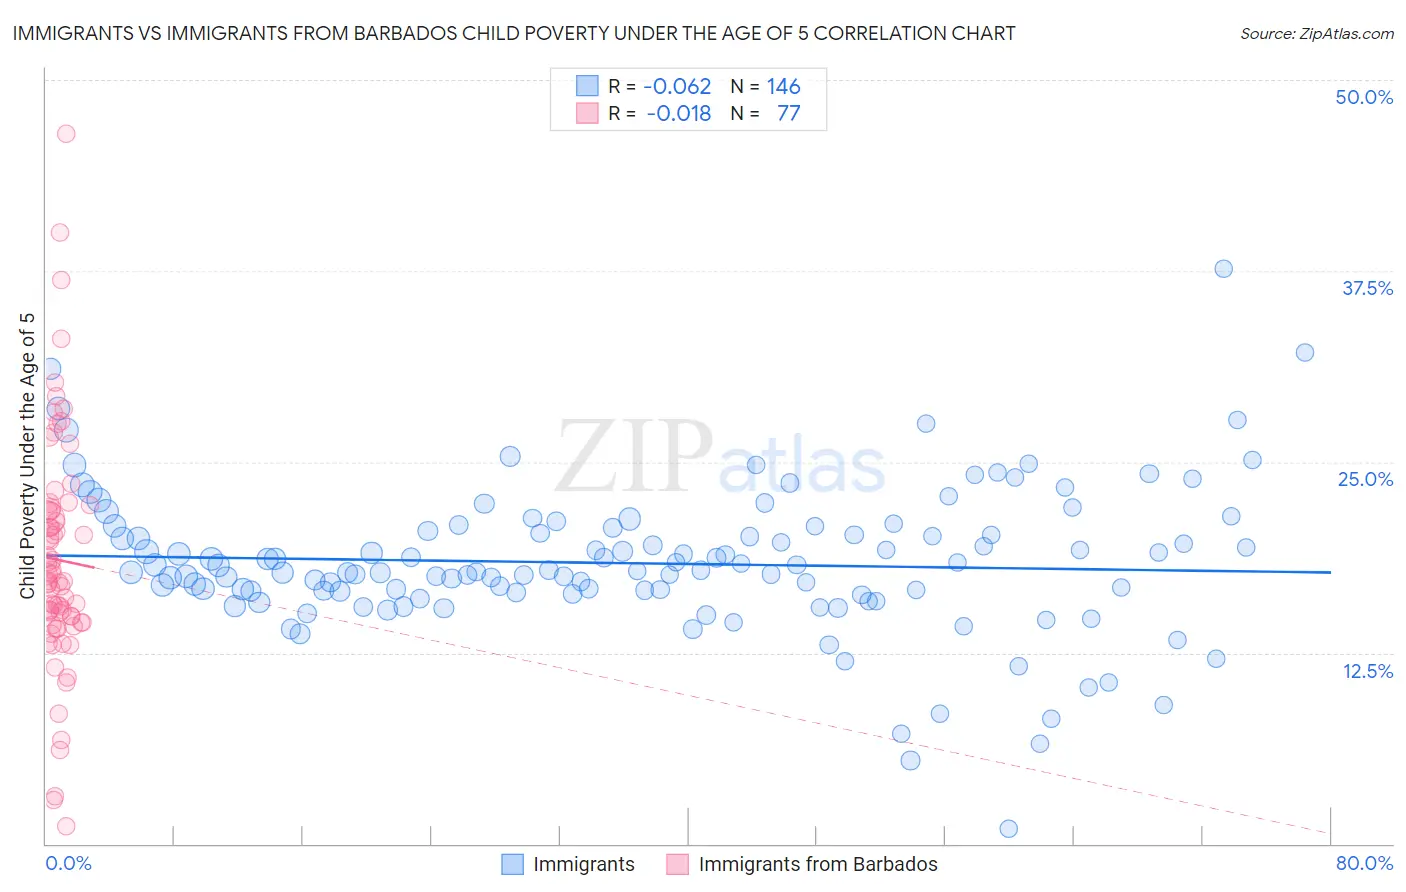 Immigrants vs Immigrants from Barbados Child Poverty Under the Age of 5